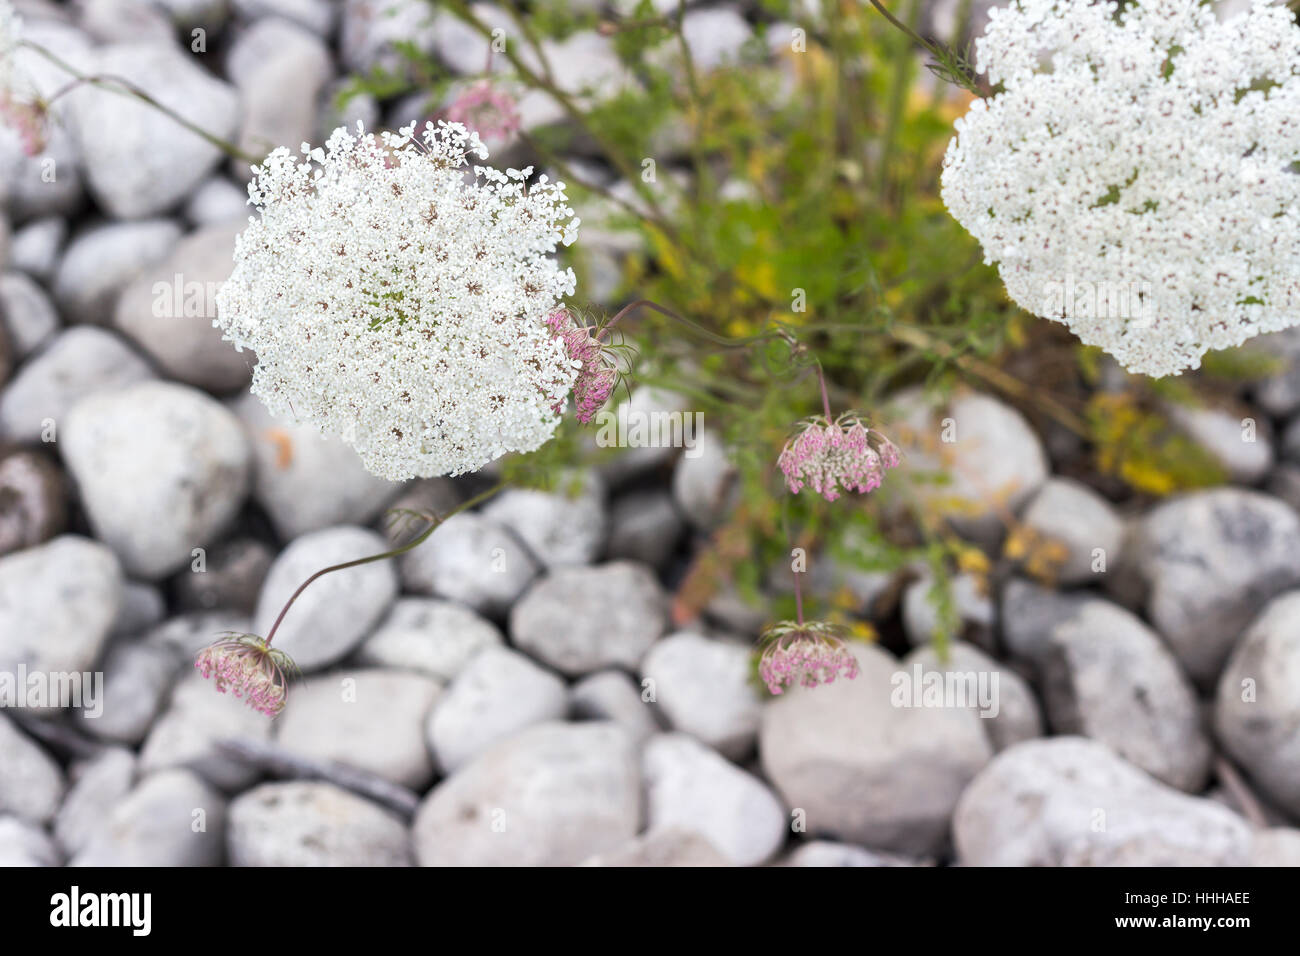 White flowers and rocks Stock Photo